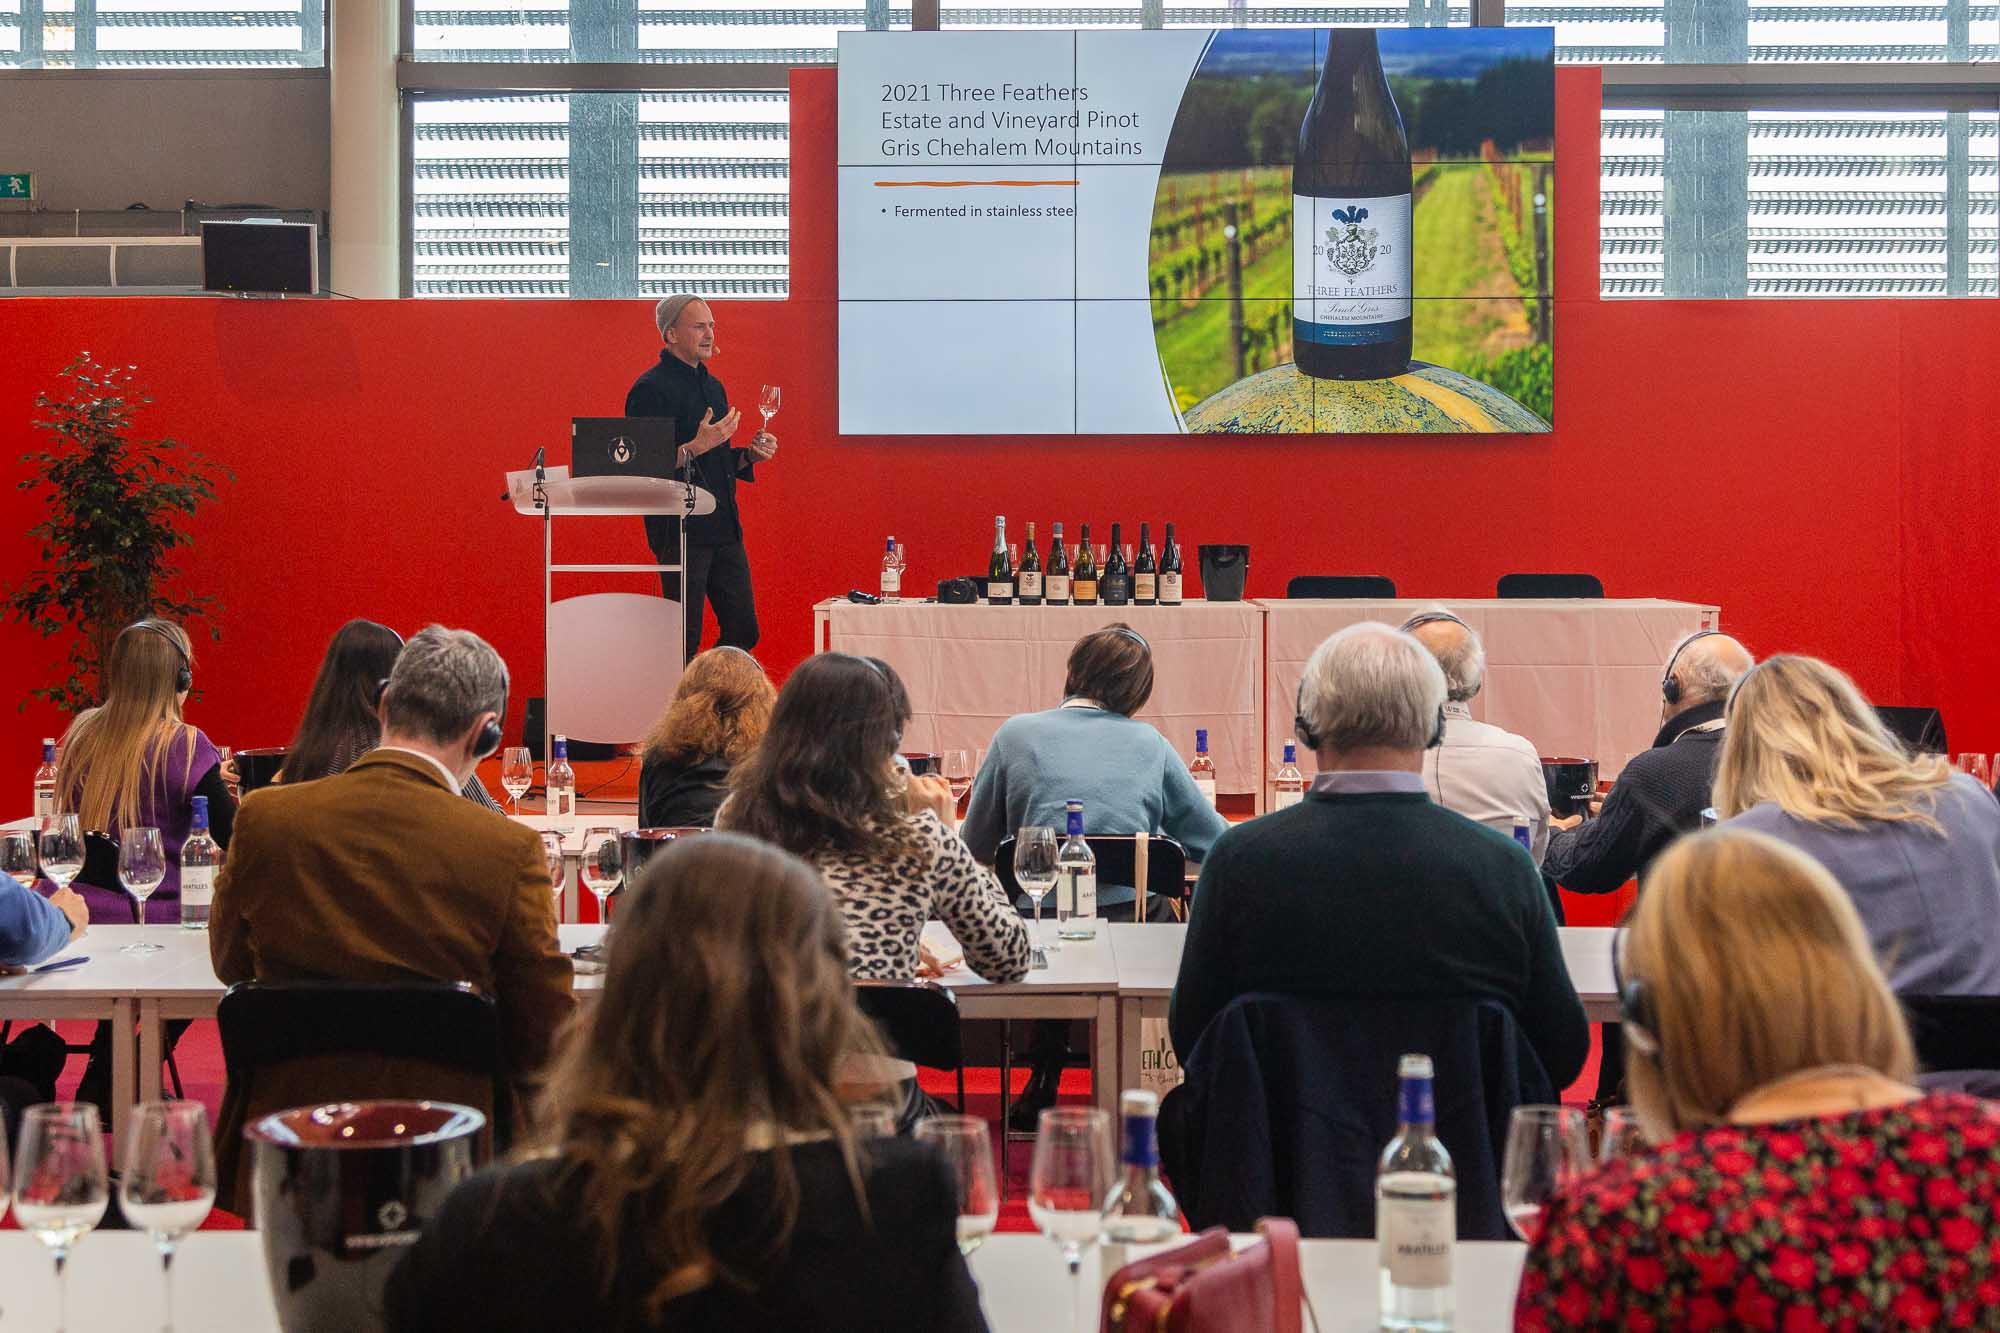 Our Pinot Gris was highlighted in a Master Class at the Expo.